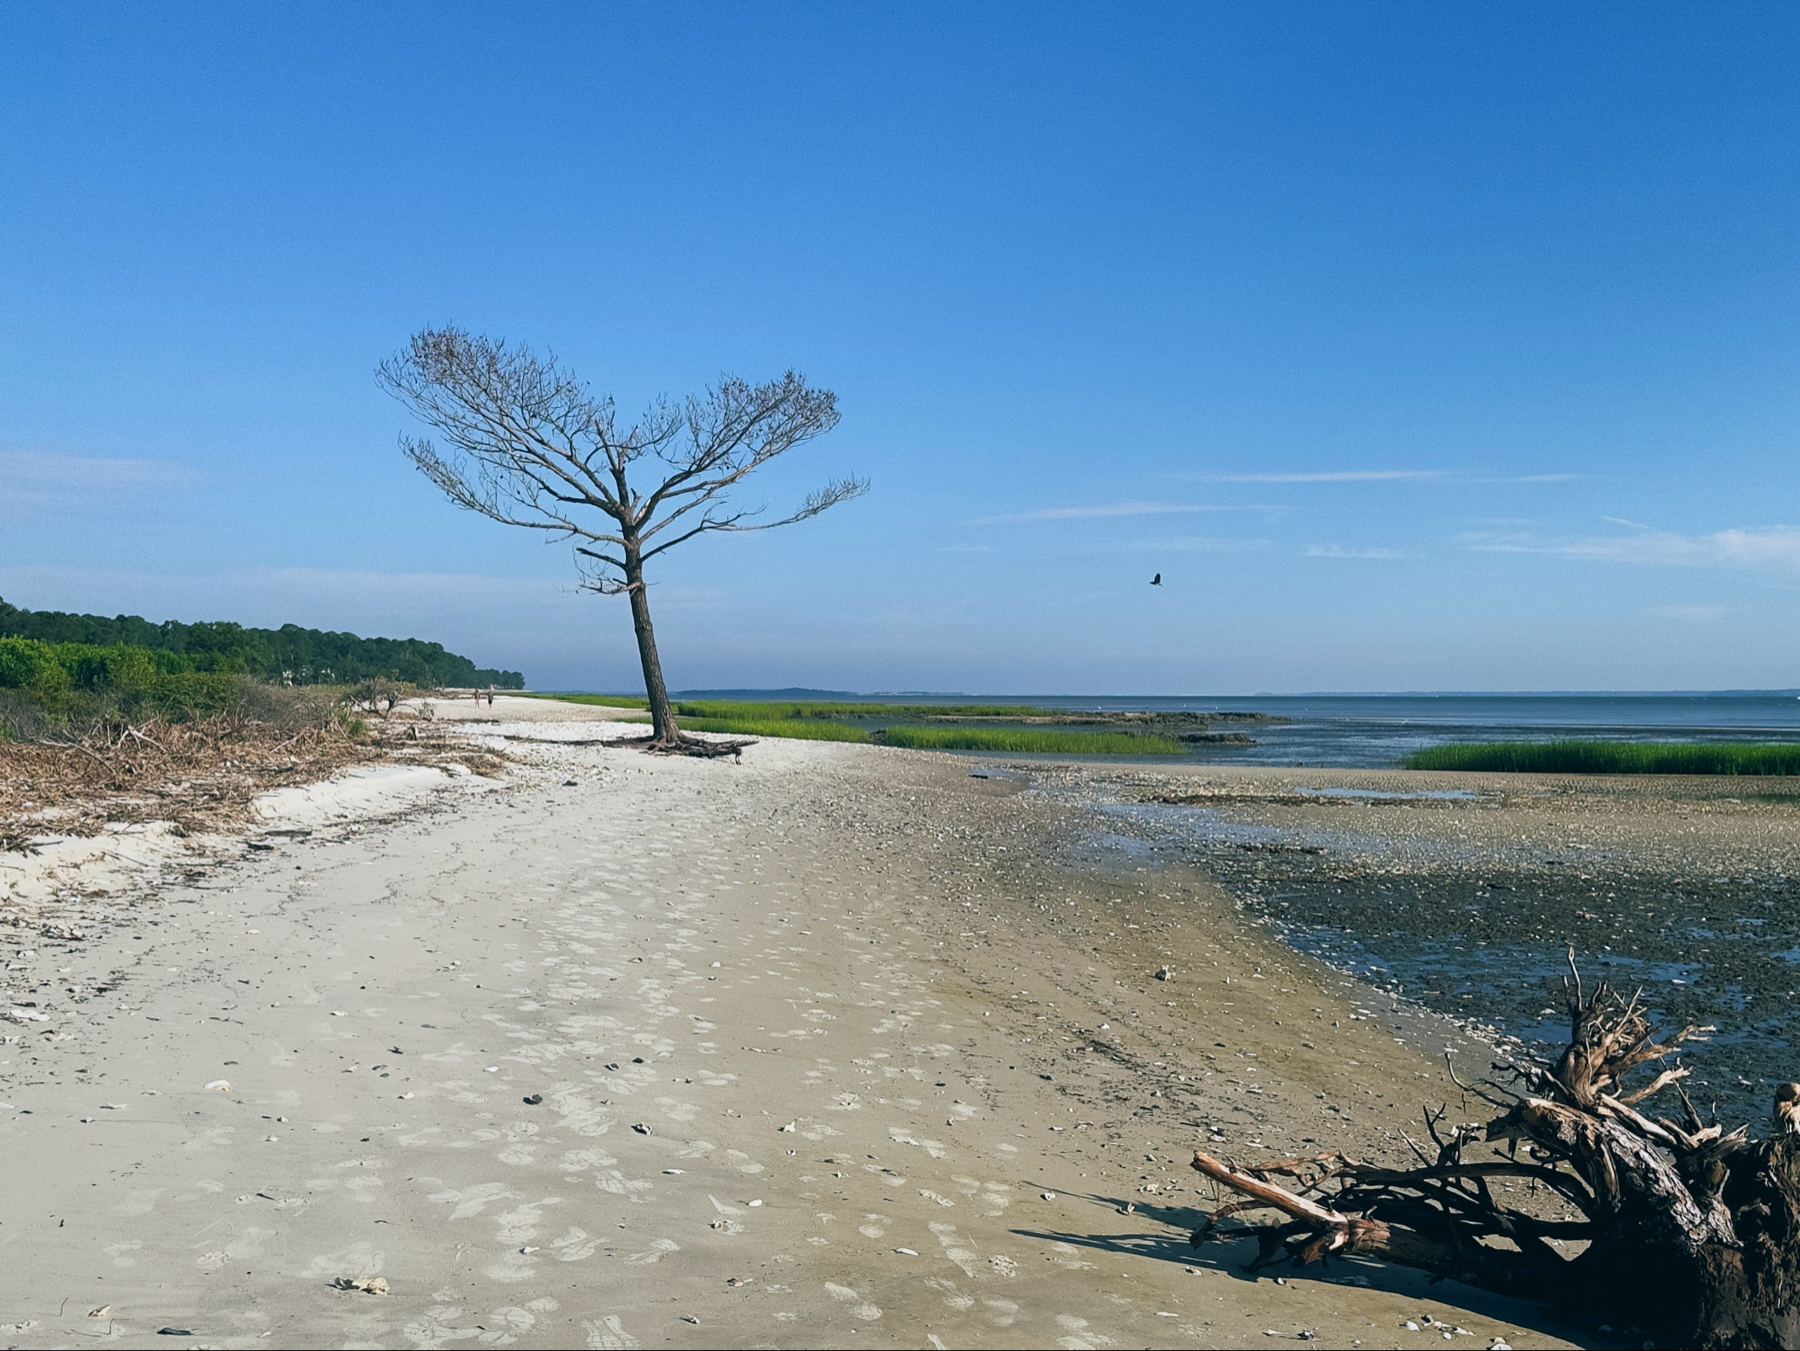 A dead tree stands tall on a beach, looking sort of like a branchy Y. More dead tree remains in the foreground.